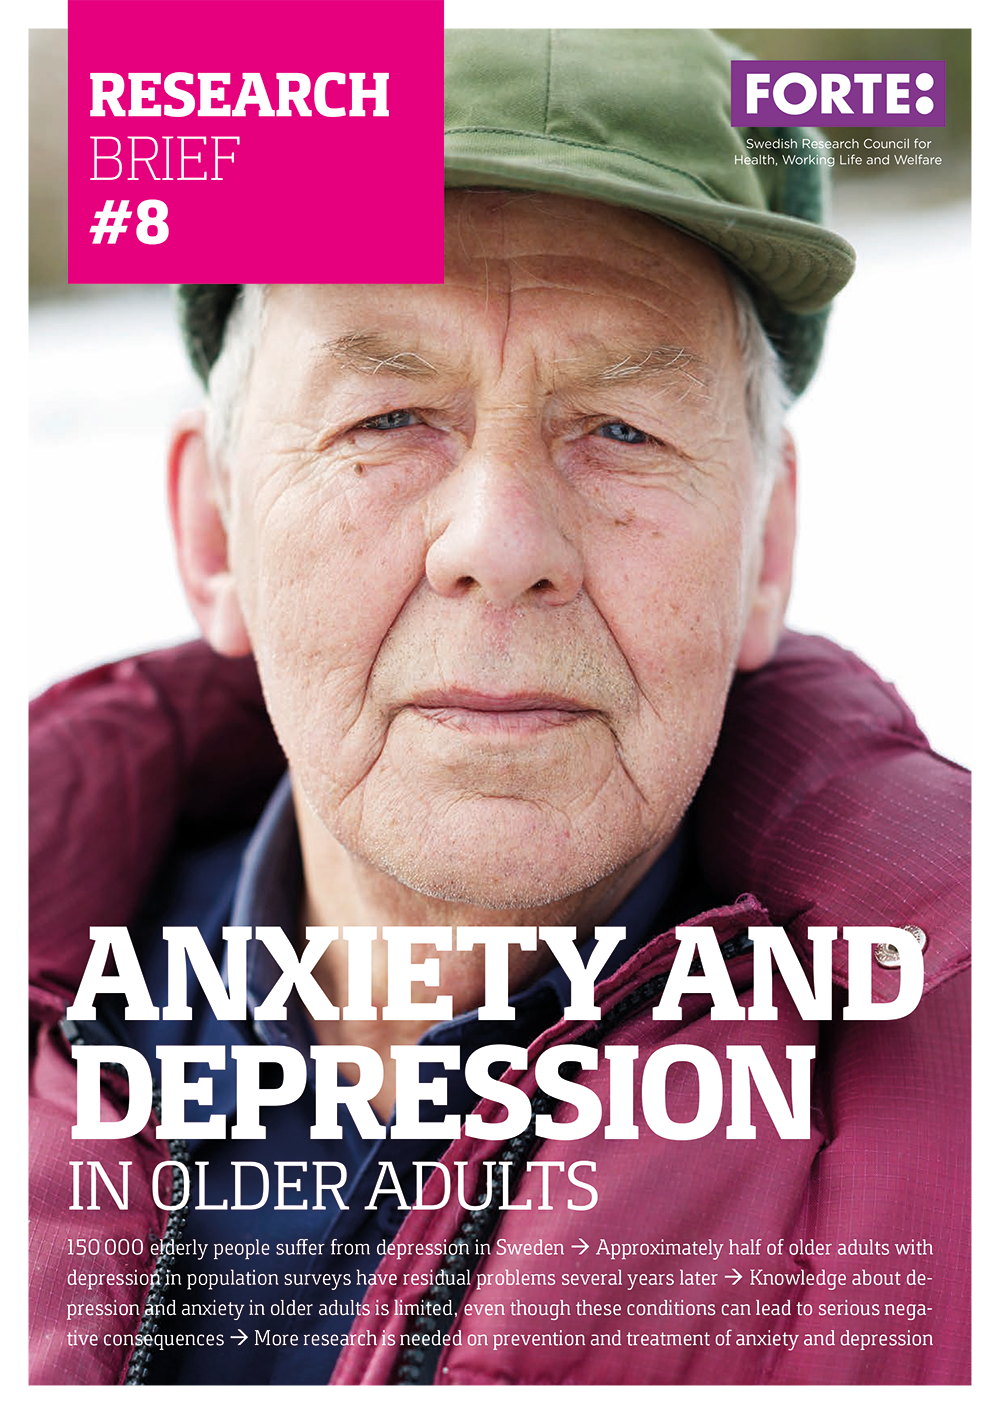 Research brief: Anxiety and depression in older adults